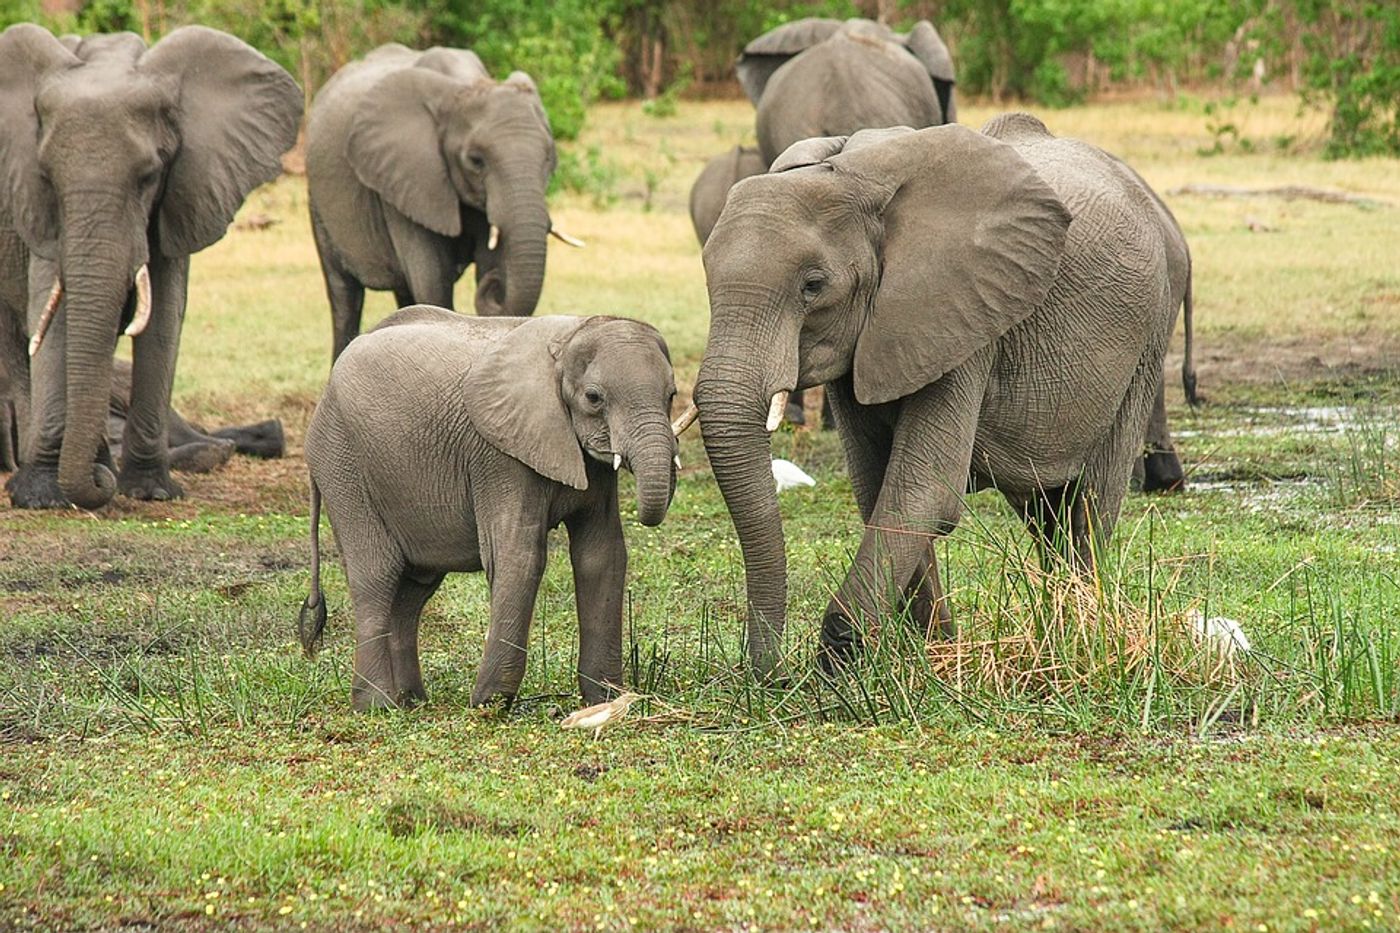 New research suggests high numbers of tourists are stressing elephants out. Photo: Pixabay